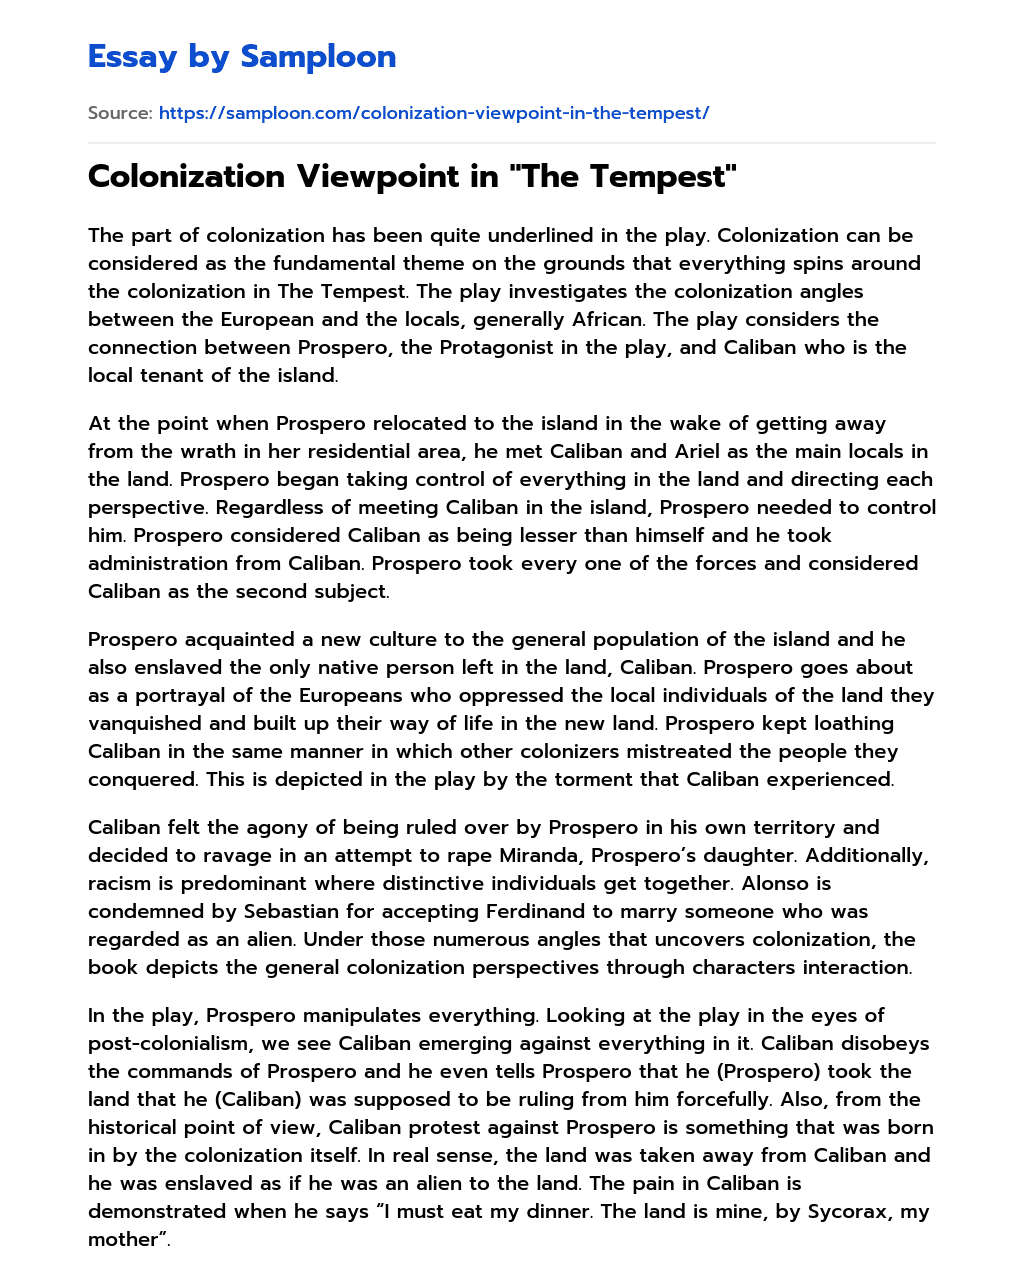 Colonization Viewpoint in “The Tempest” essay